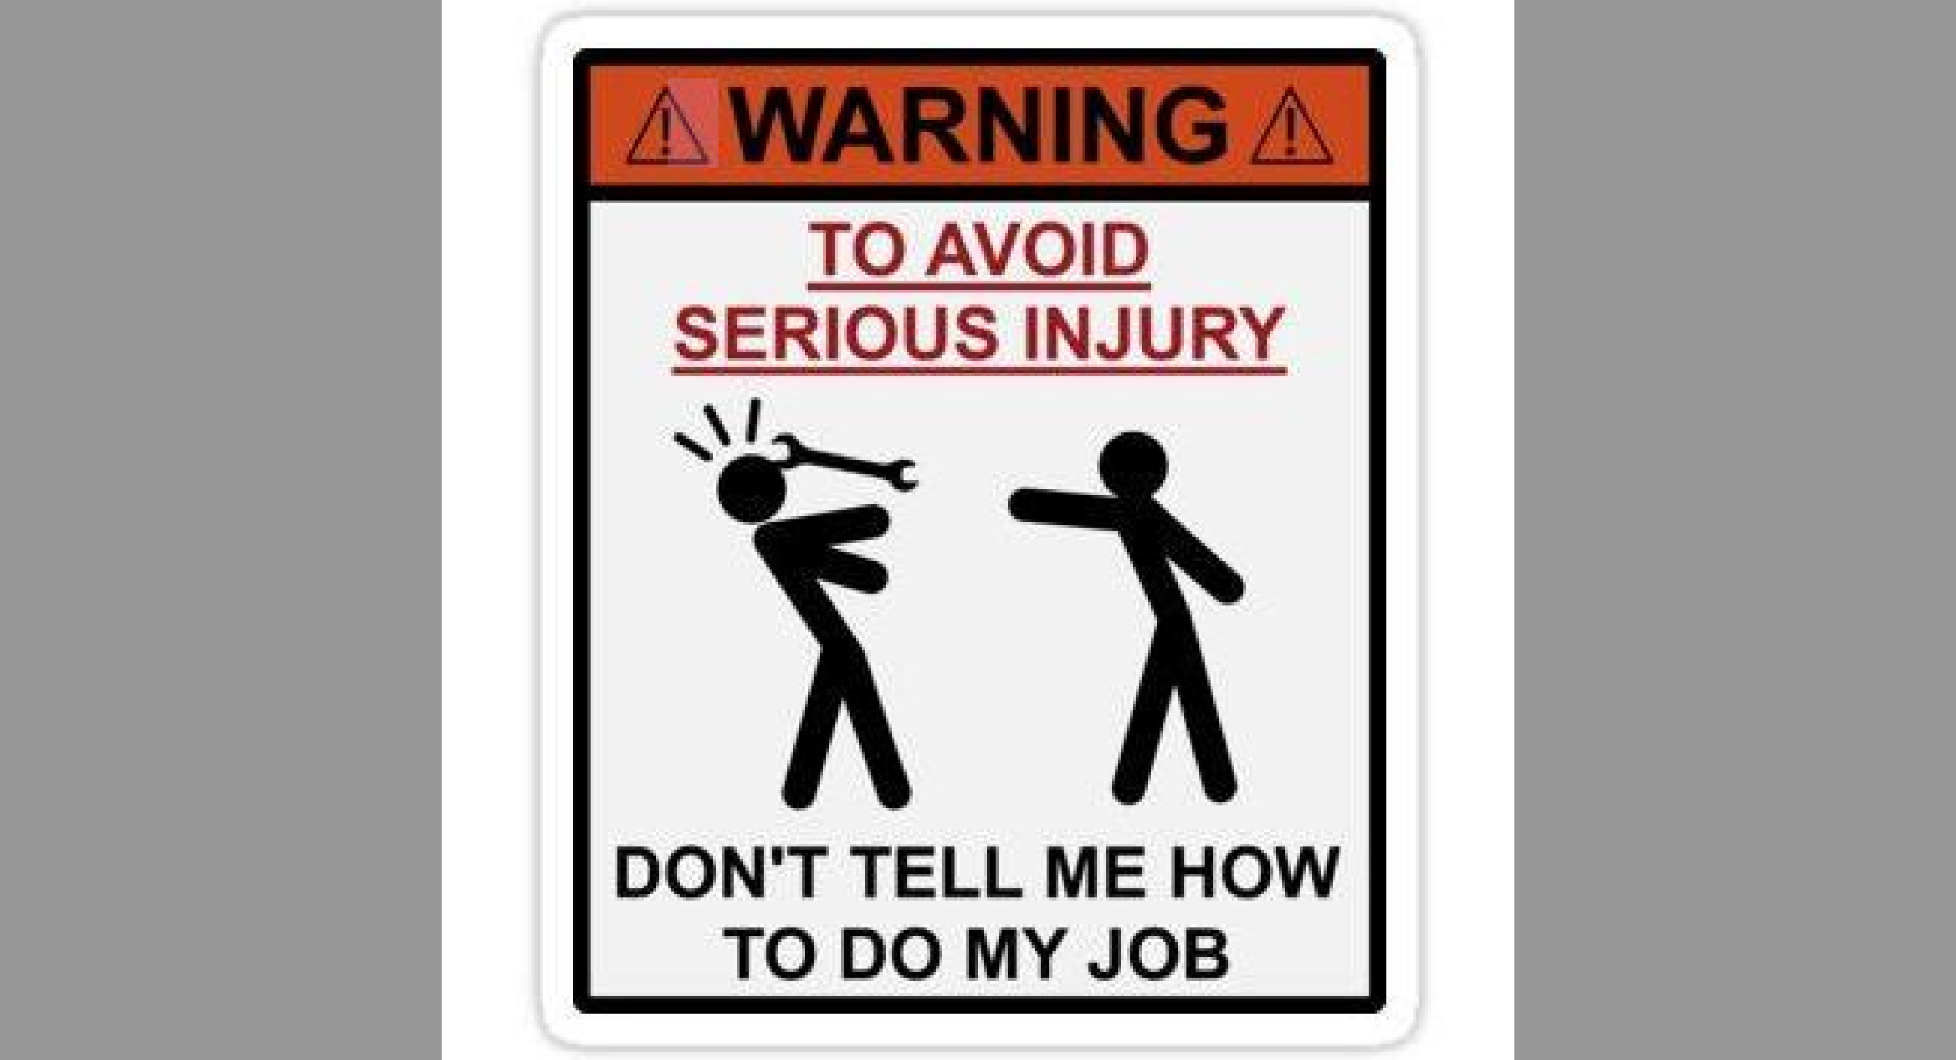 I tell end. Don't tell me how to do my job. Warning don't tell me how to do my job. Don't tell me how to do my job poster. To avoid injury don't tell me how to do my job перевод.